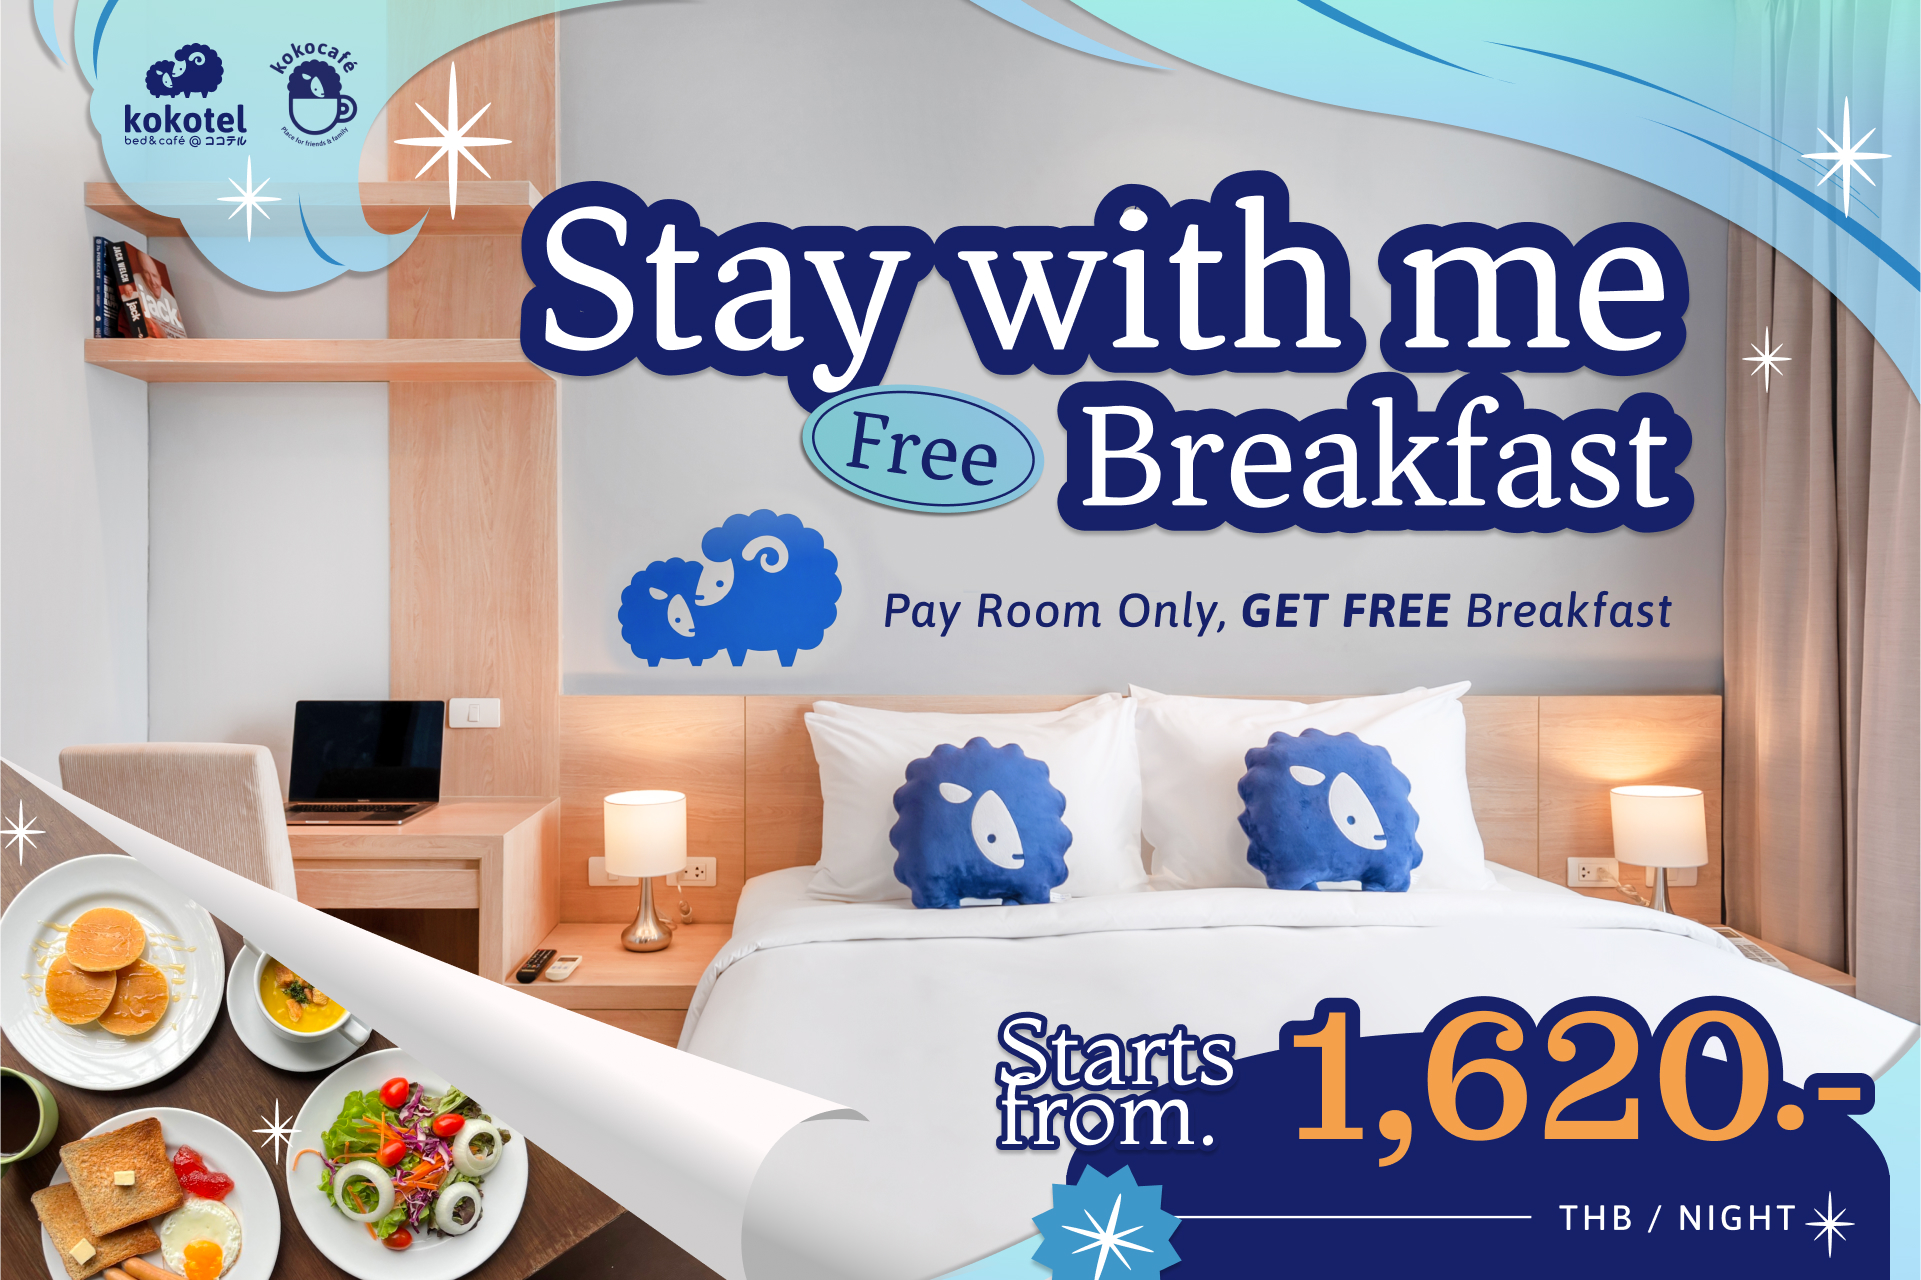 Stay with me, Free Breakfast